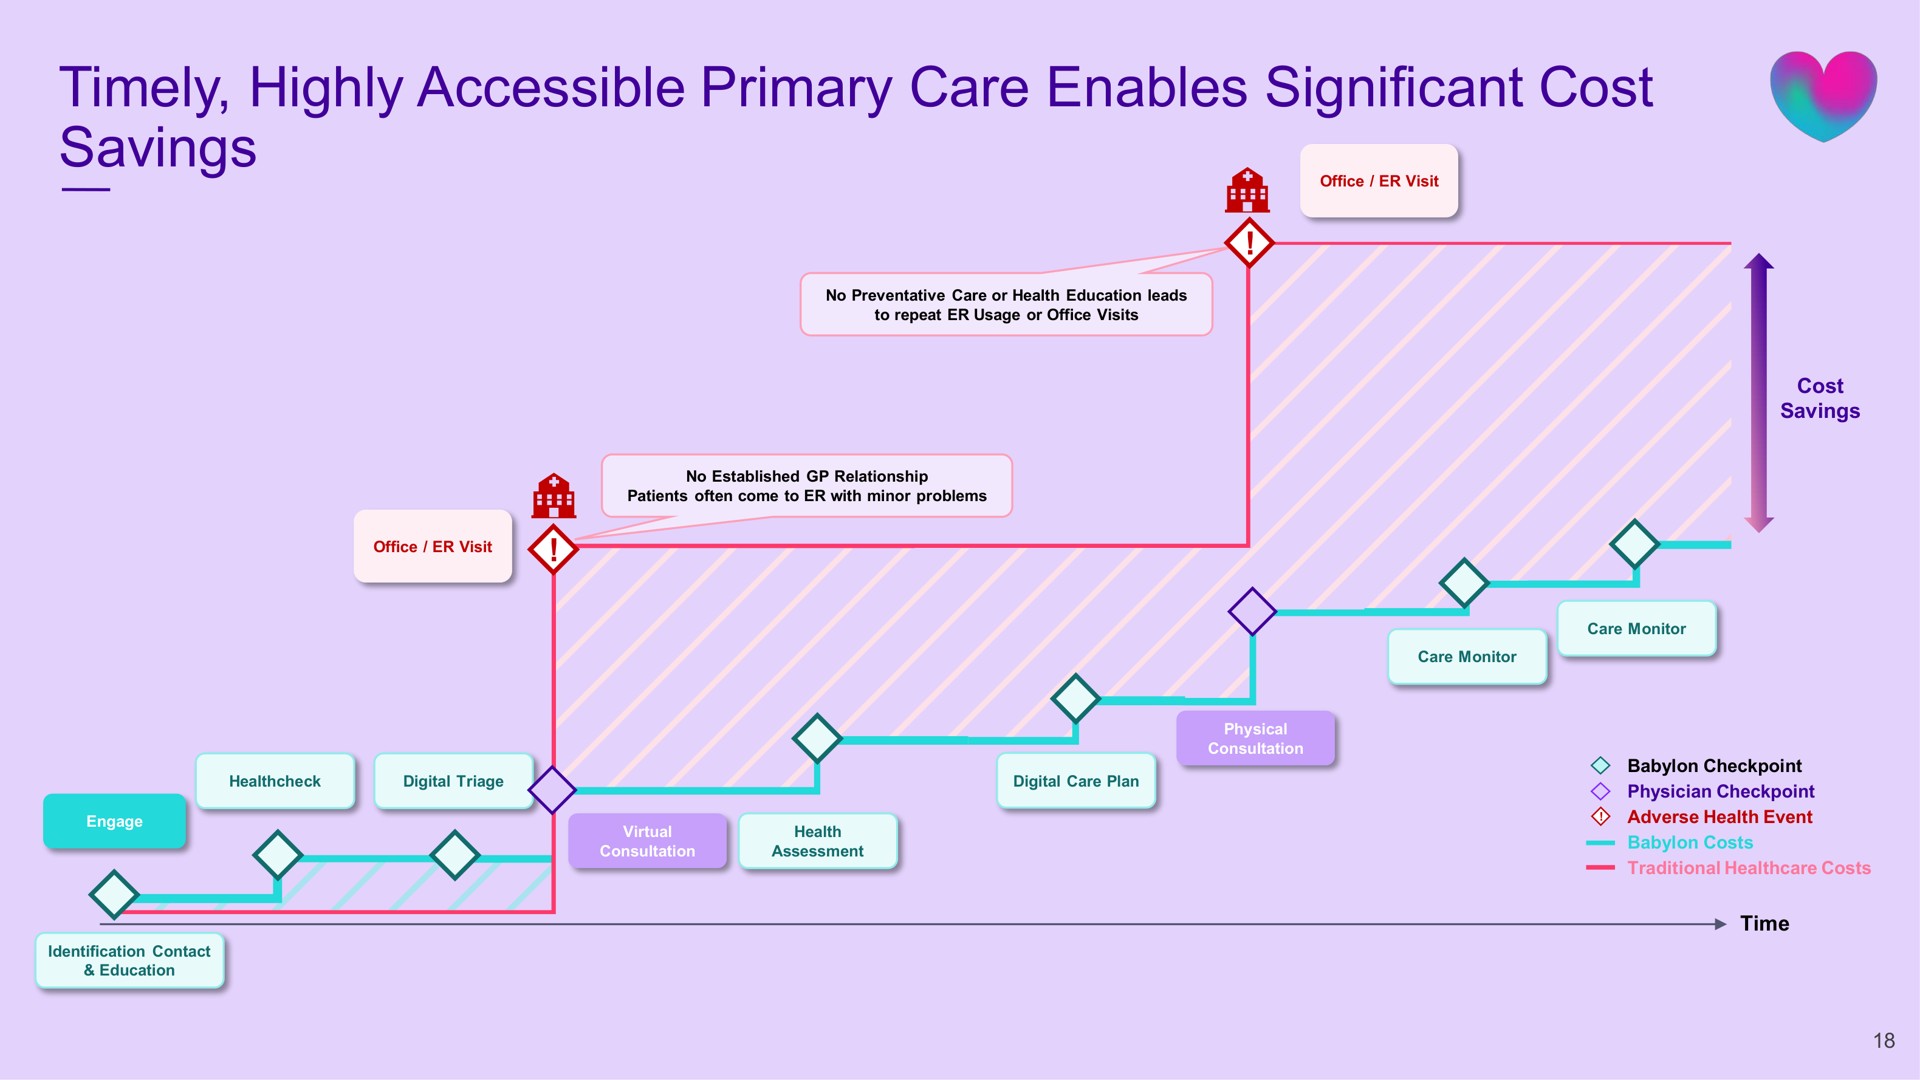 timely highly accessible primary care enables significant cost savings | Babylon